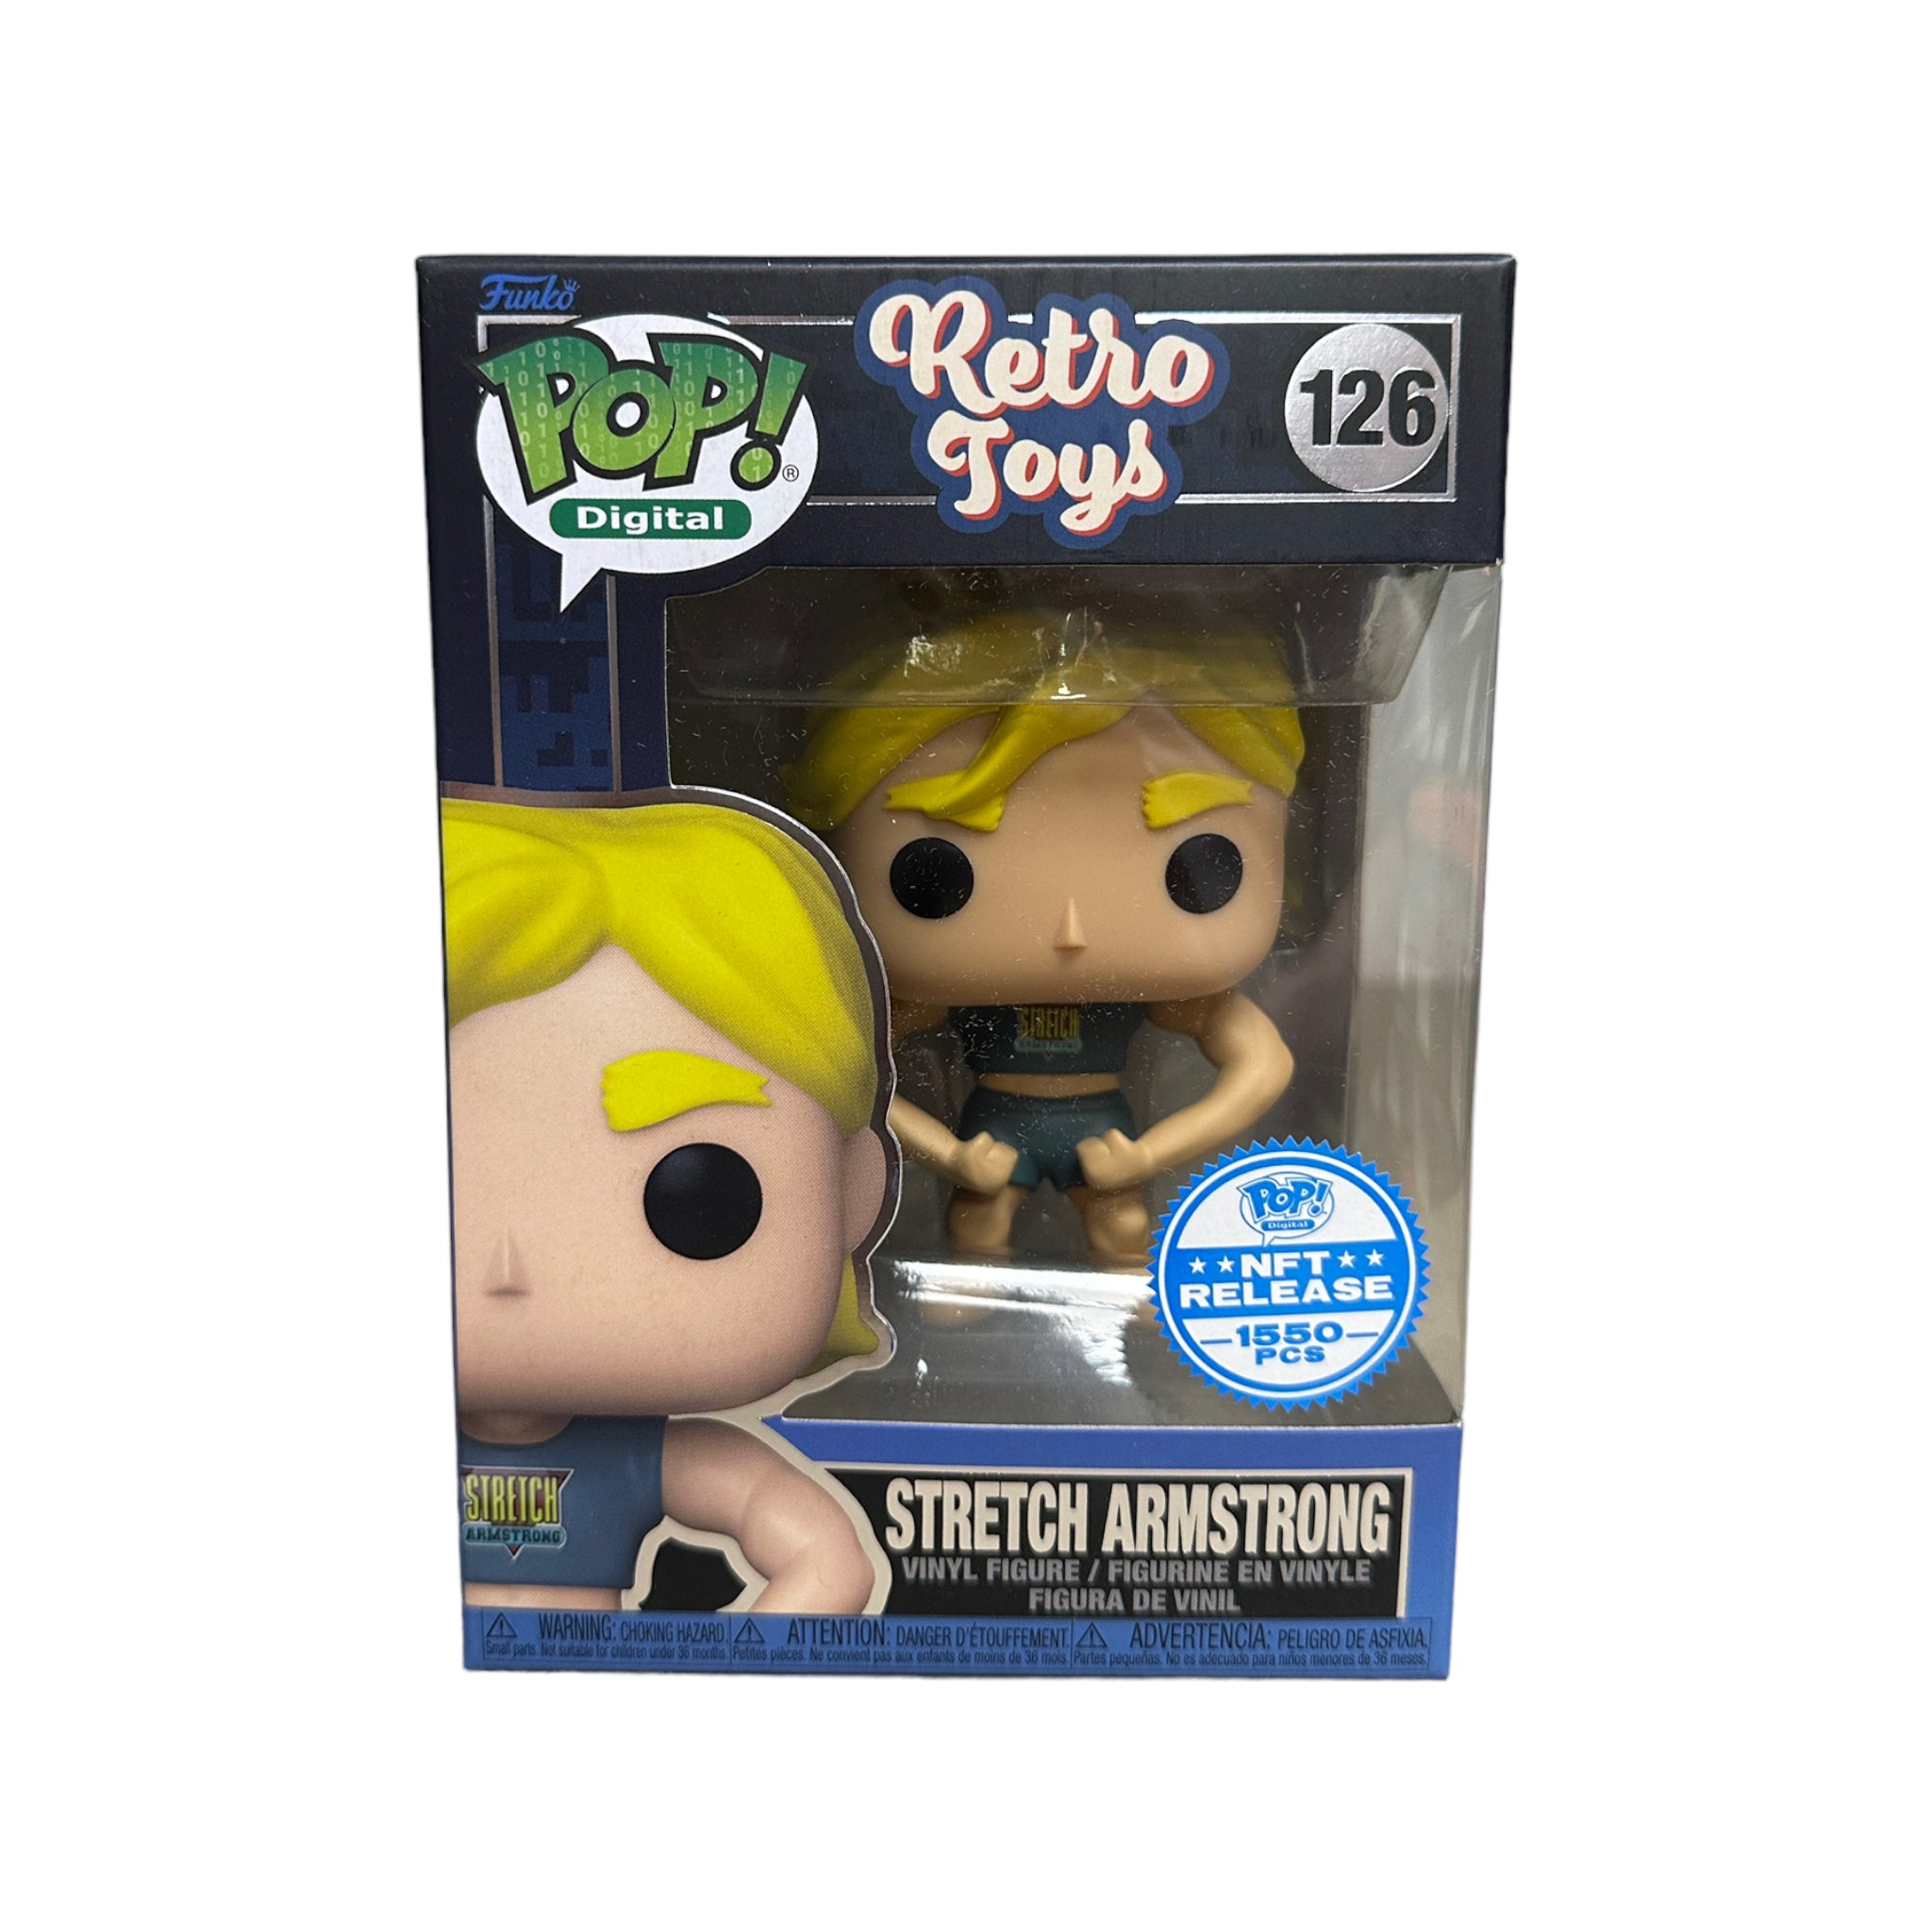 Stretch Armstrong #126 Funko Pop! - Retro Toys - NFT Release Exclusive LE1550 Pcs - Condition 9.5/10